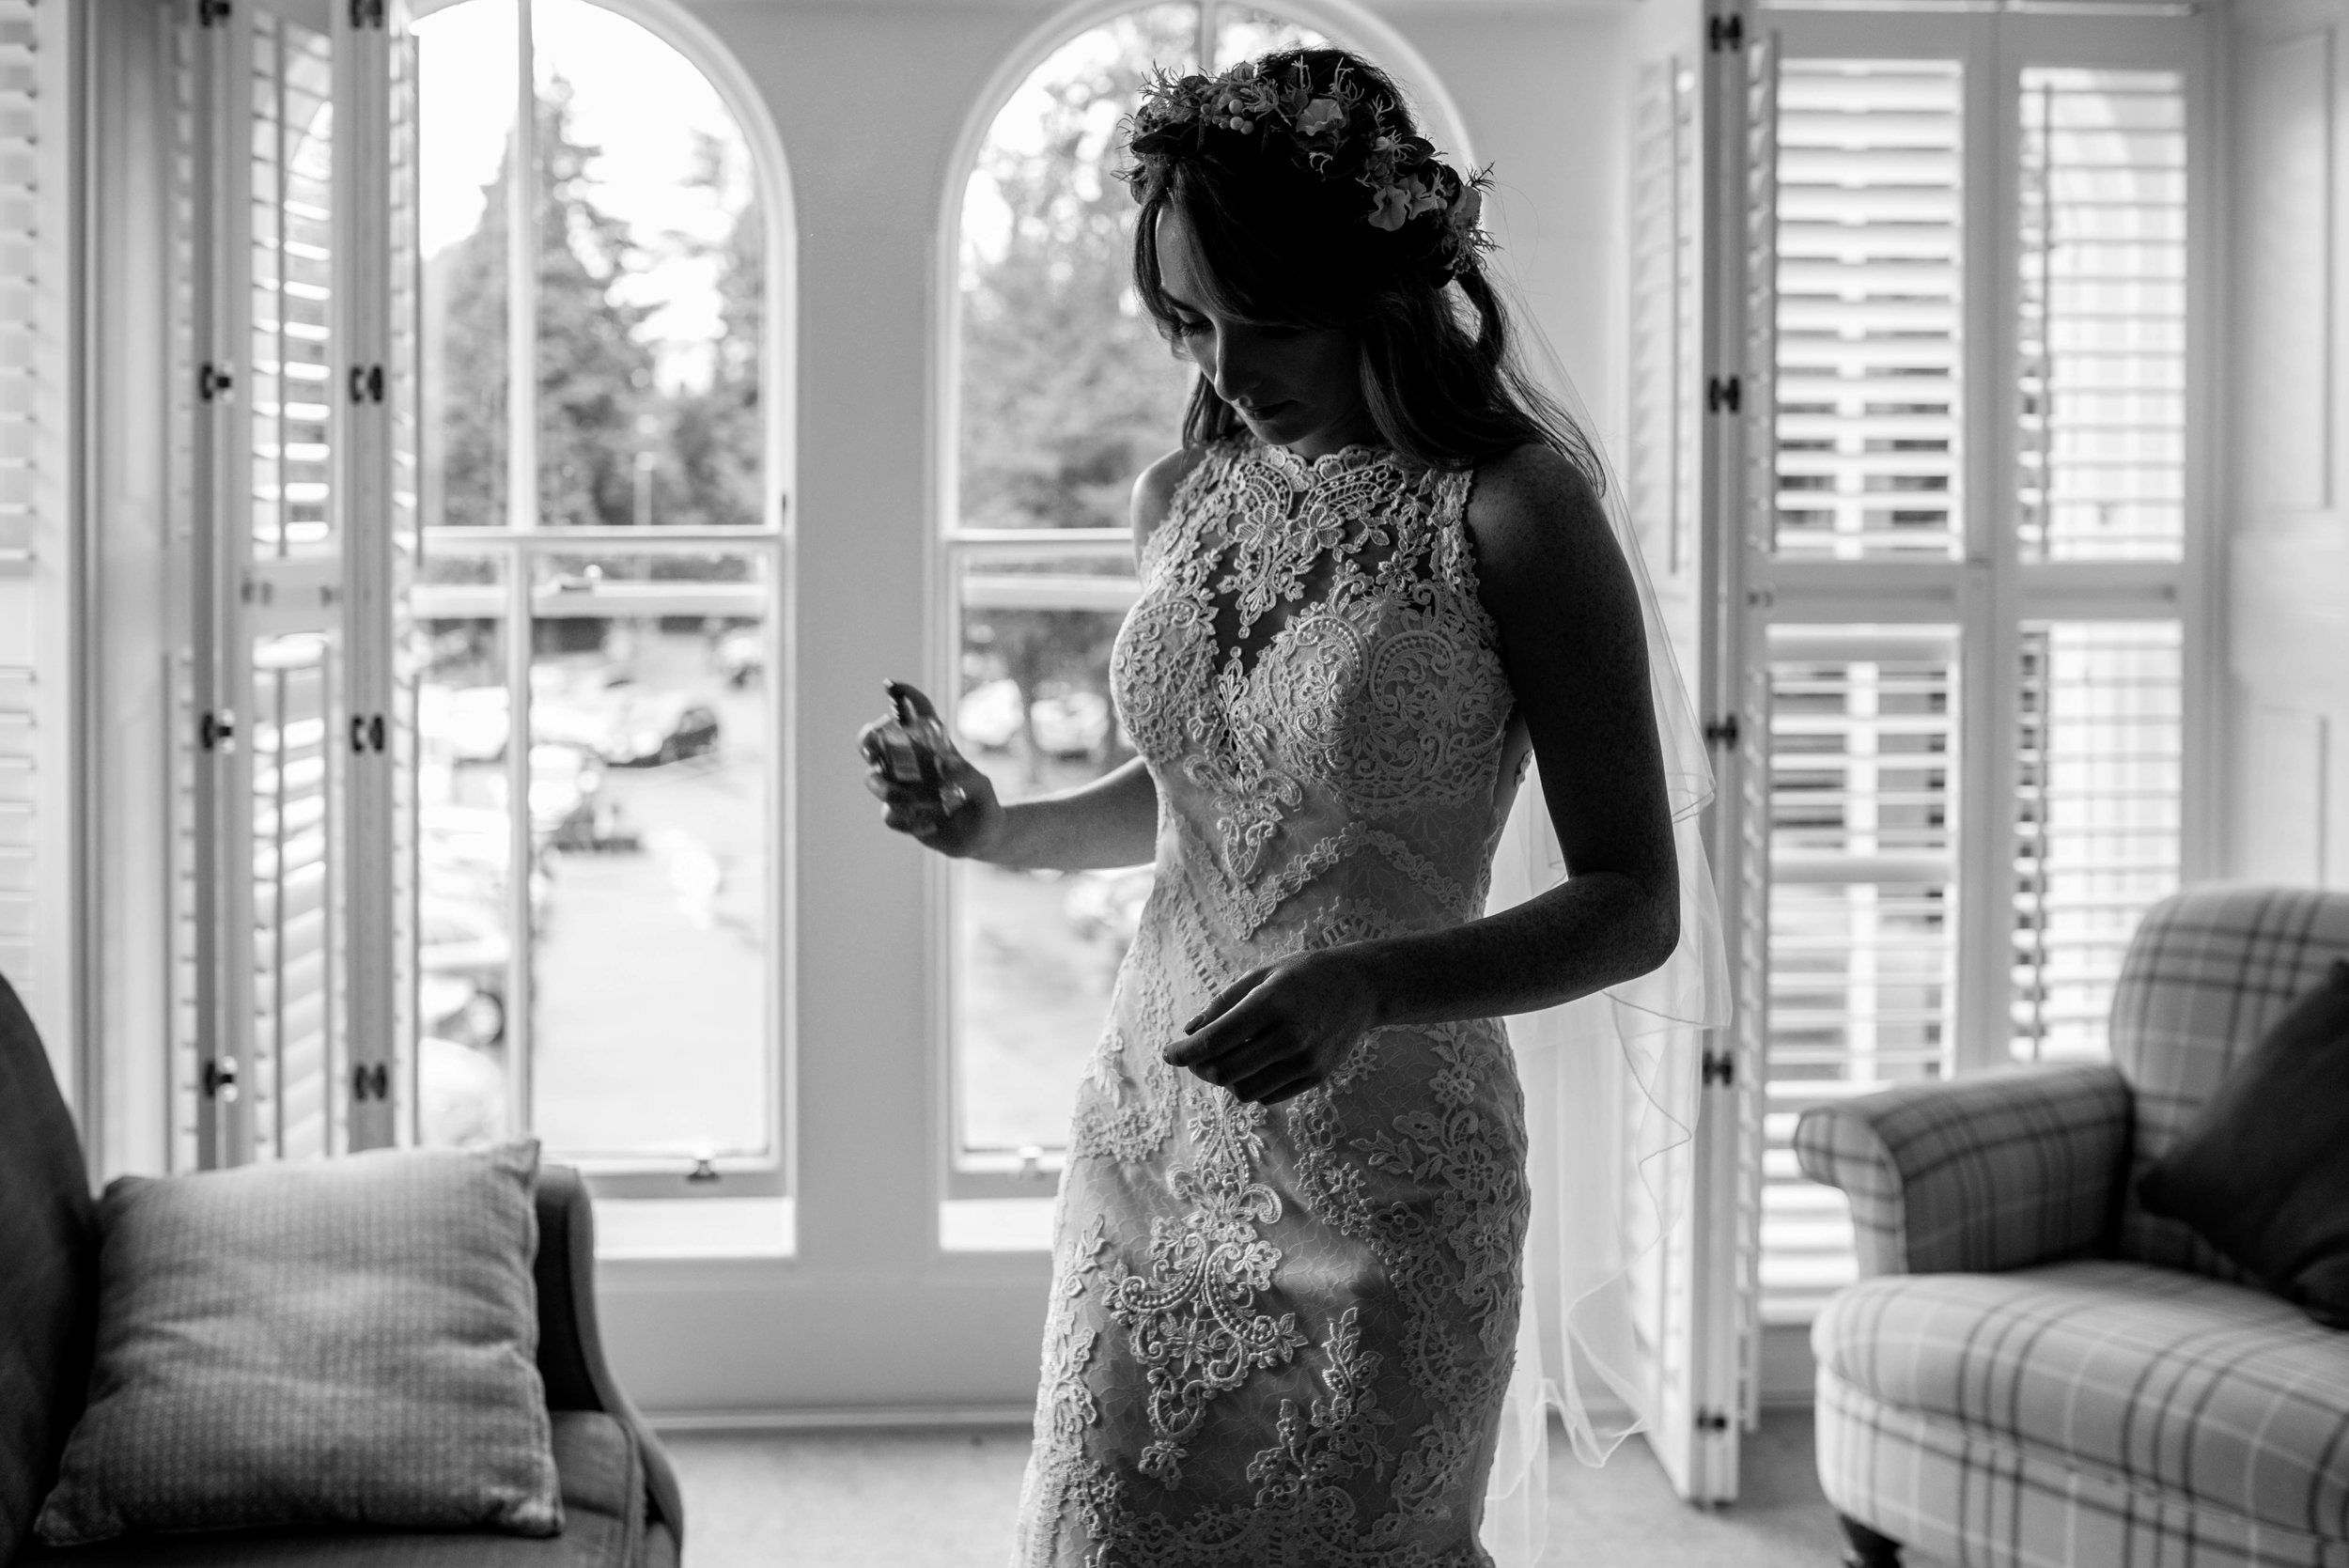 The bride applies perfume before heading down for her Cumbrian wedding